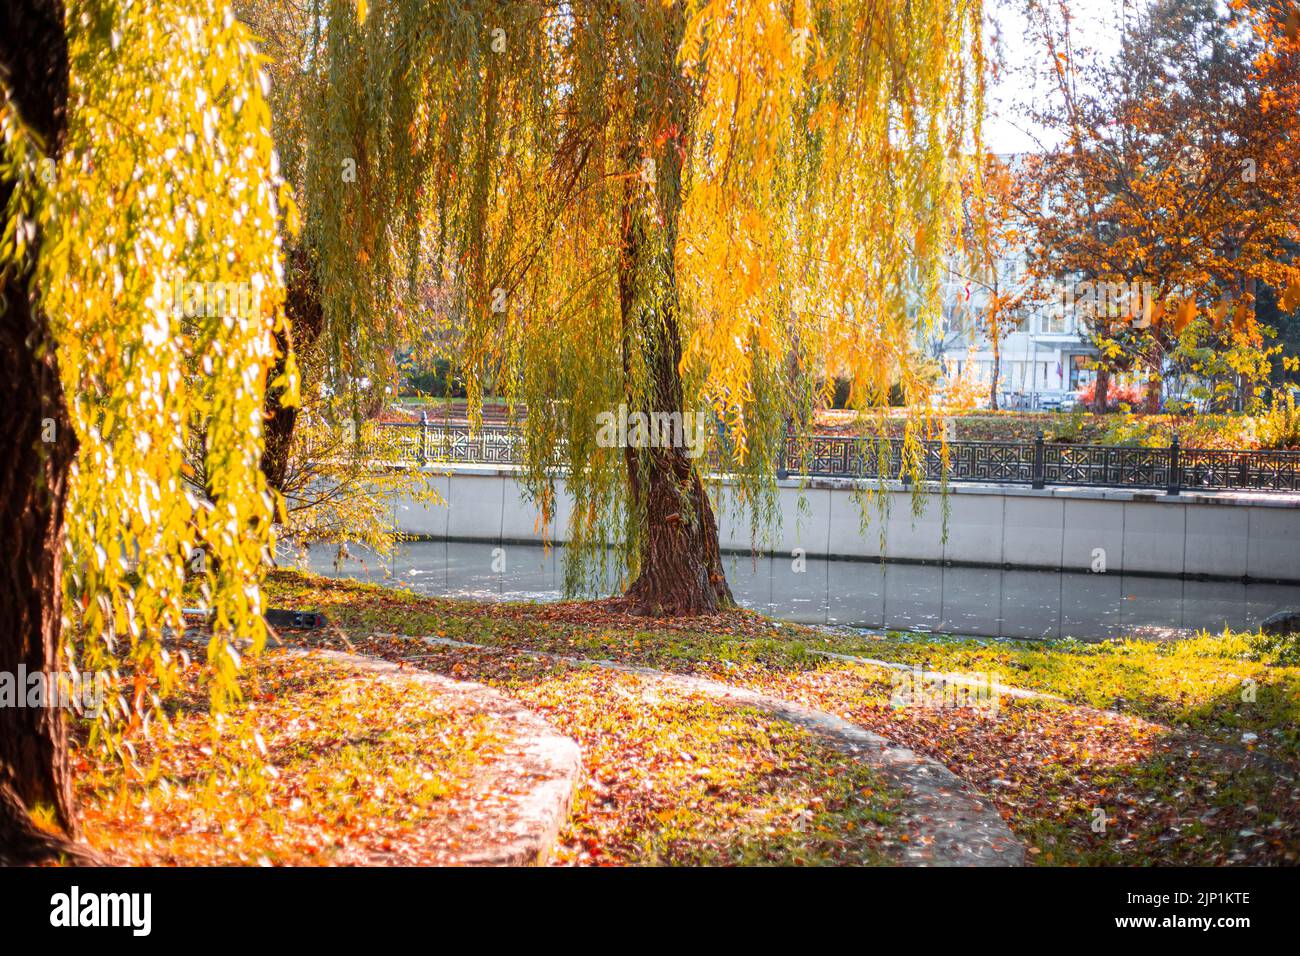 Autumn landscape on a sunny day. Yellow willow foliage over a pond in a city park. Stock Photo